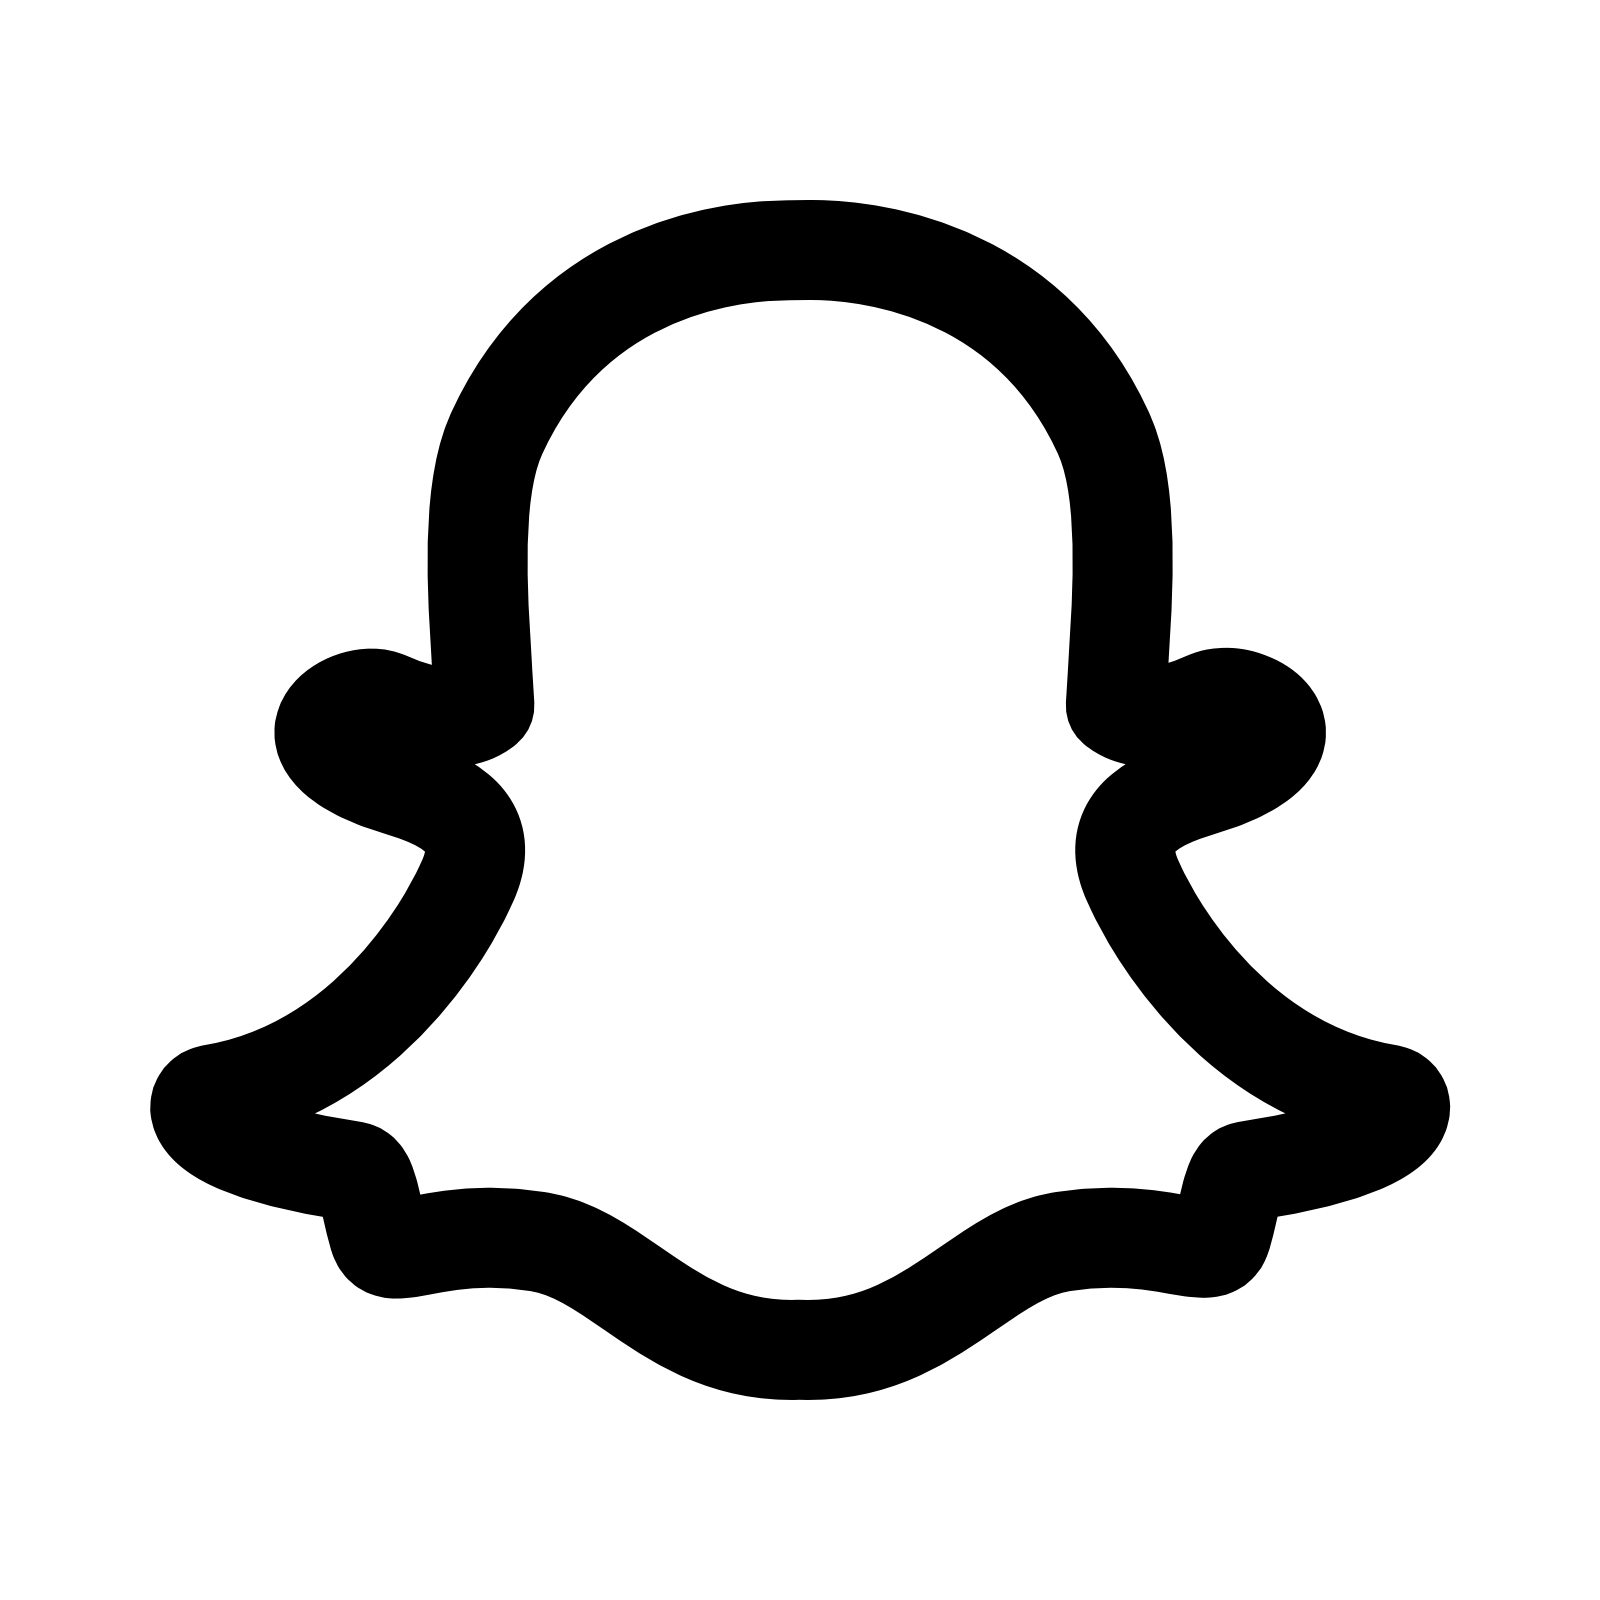 HQ Snapchat PNG Transparent Snapchat.PNG Images. | PlusPNG